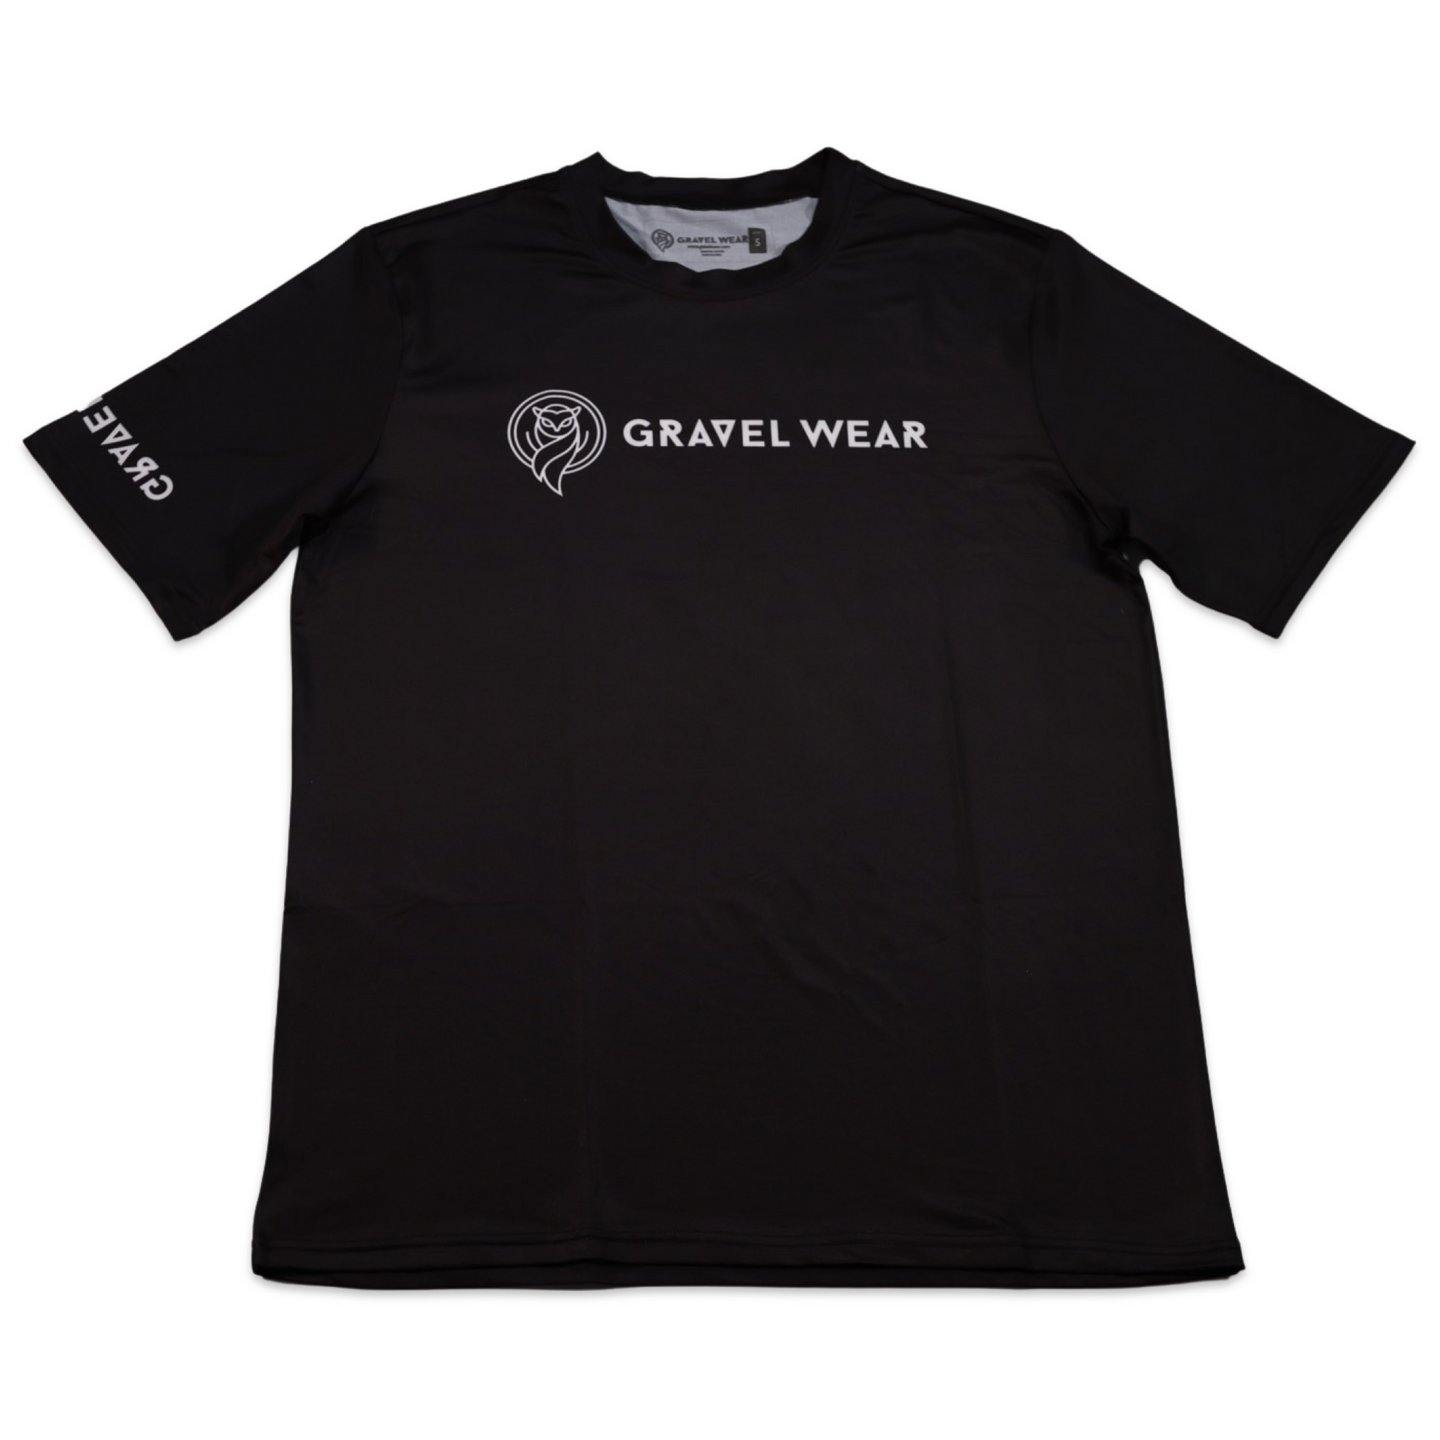 Gravel Ride Ultra Light Jersey - Black front with logo